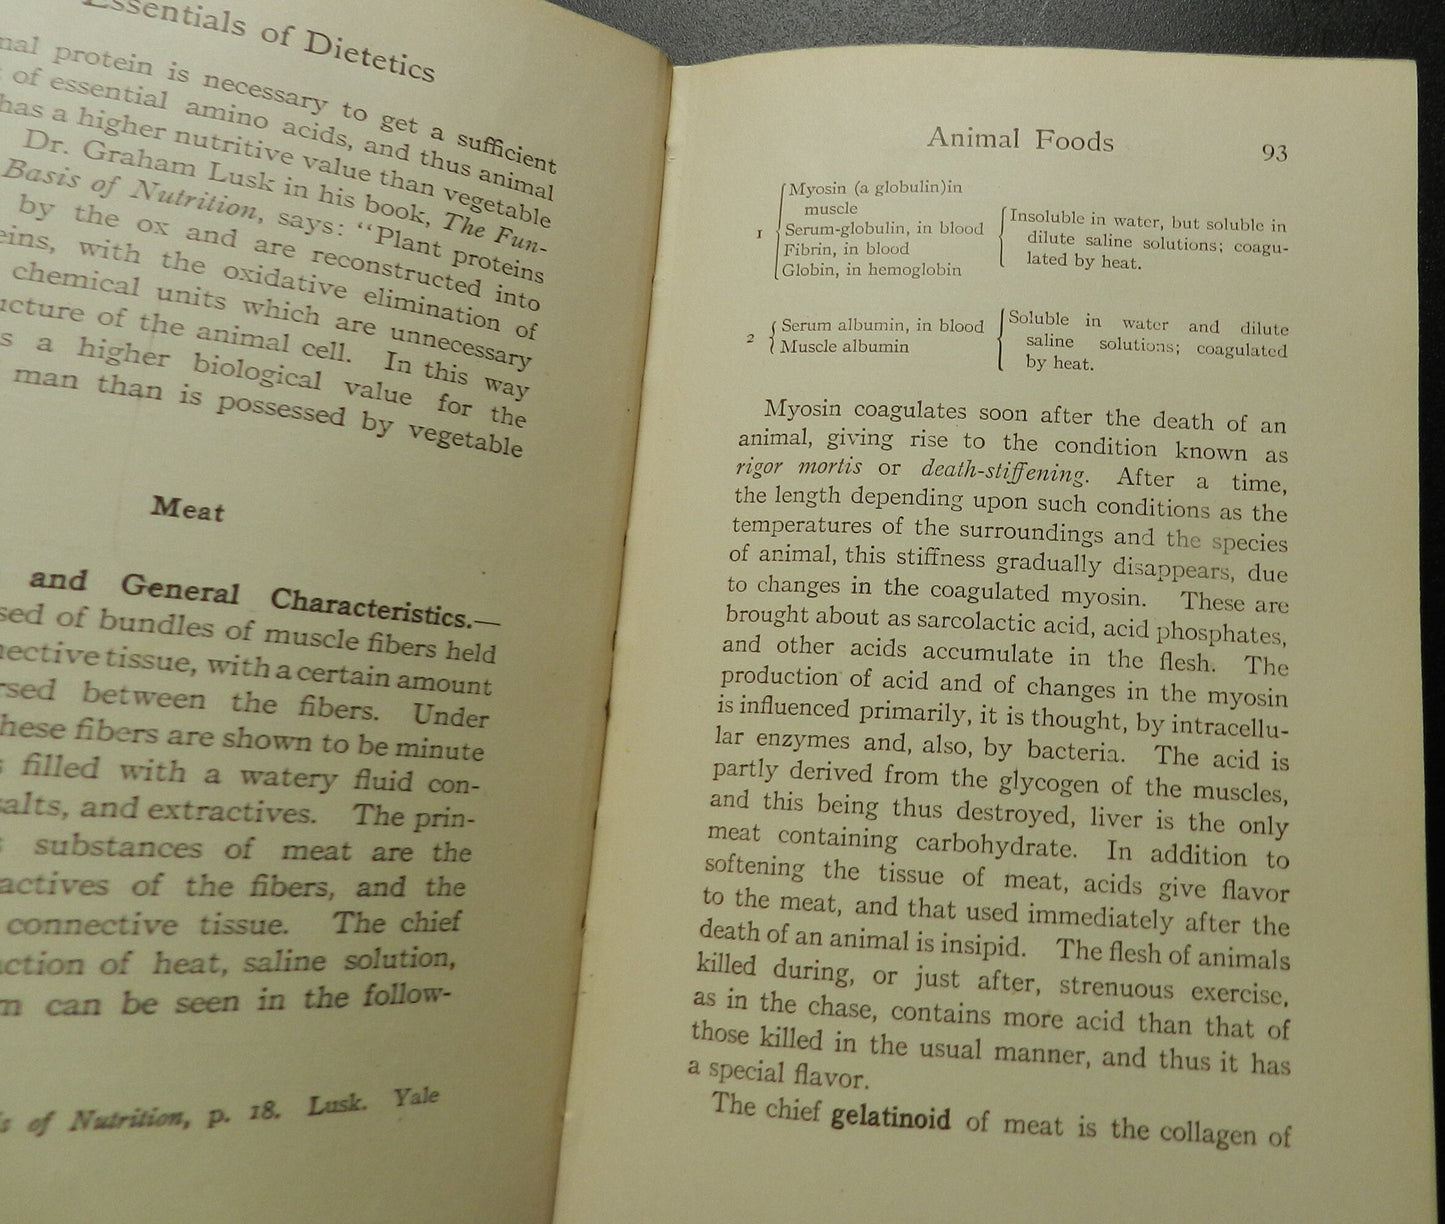 Antique Book "Essentials of Dietetics In Health and Disease A Text-Book for Nurses and A Practical Dietary Guide for the Household" by Pope